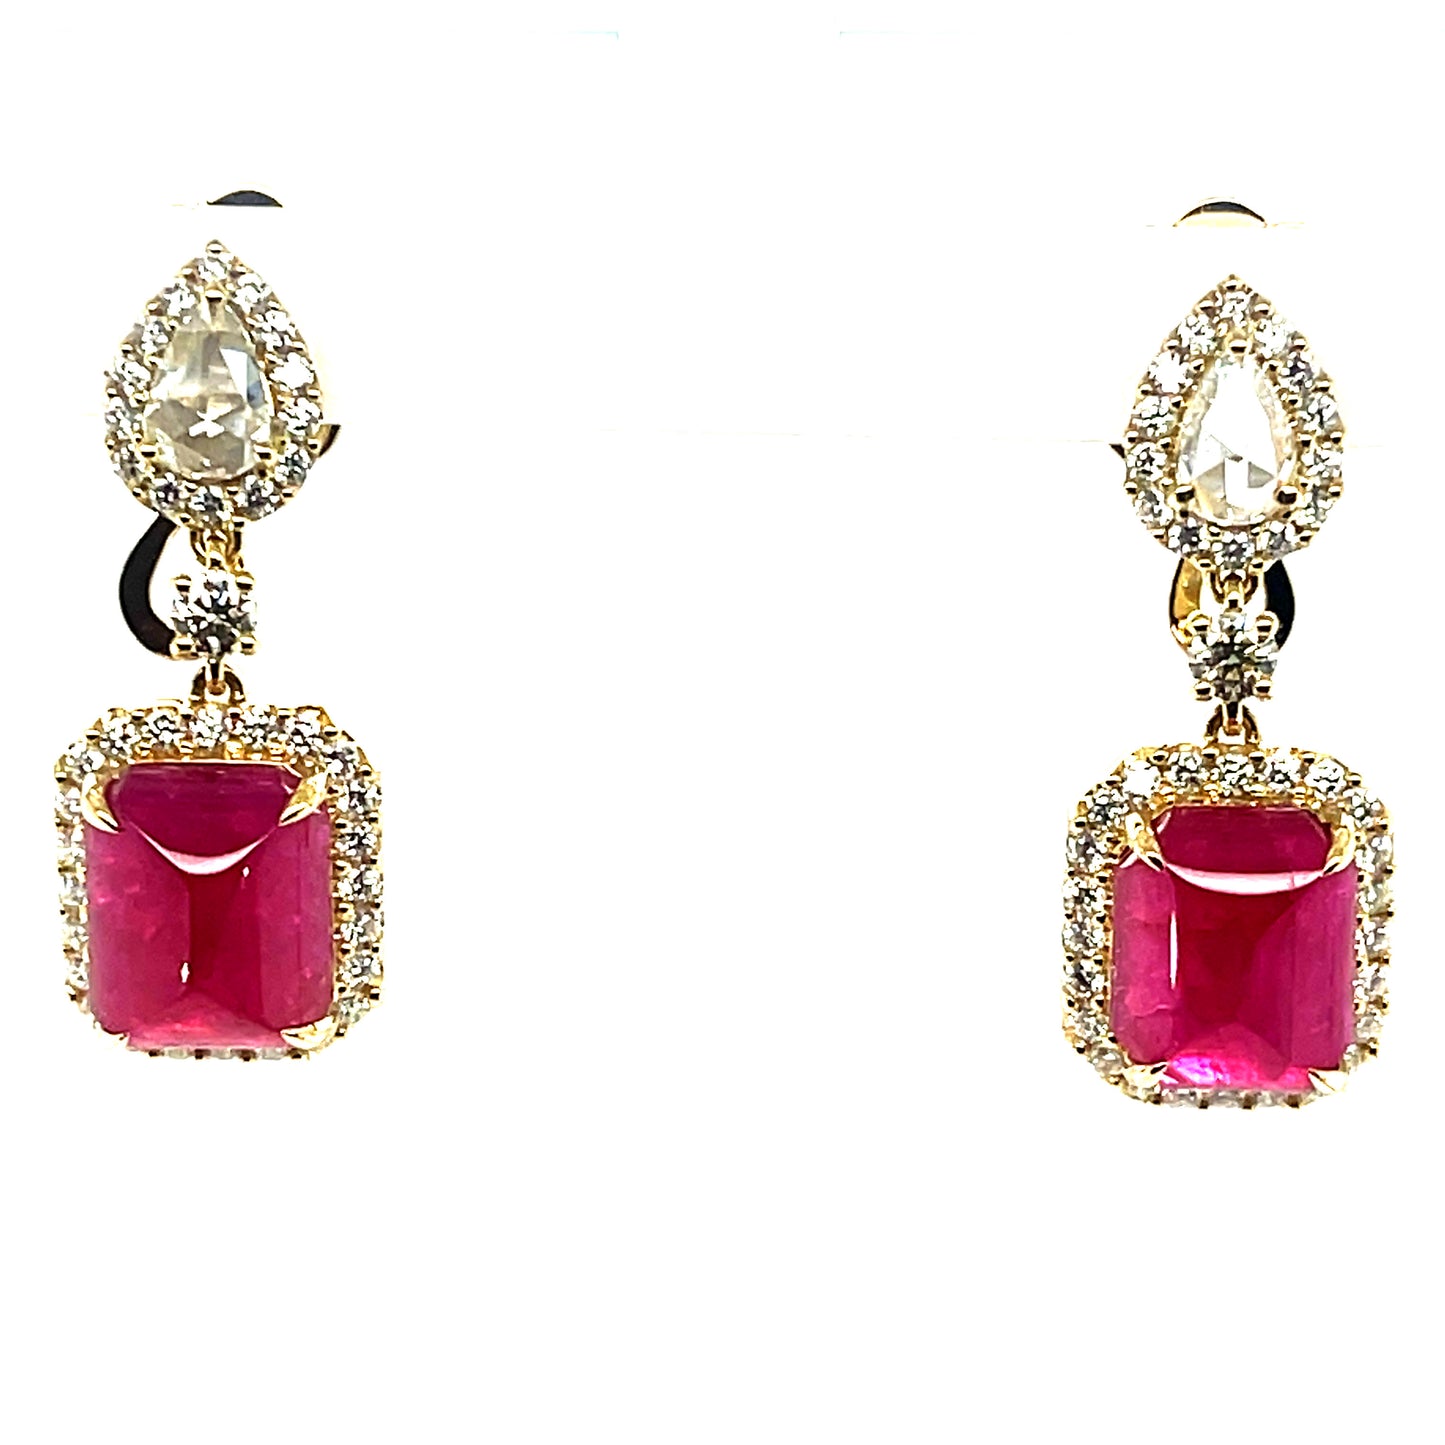 18 kt yellow gold earrings with cabachon GIA certified as natural no treatment Ruby’s and diamonds